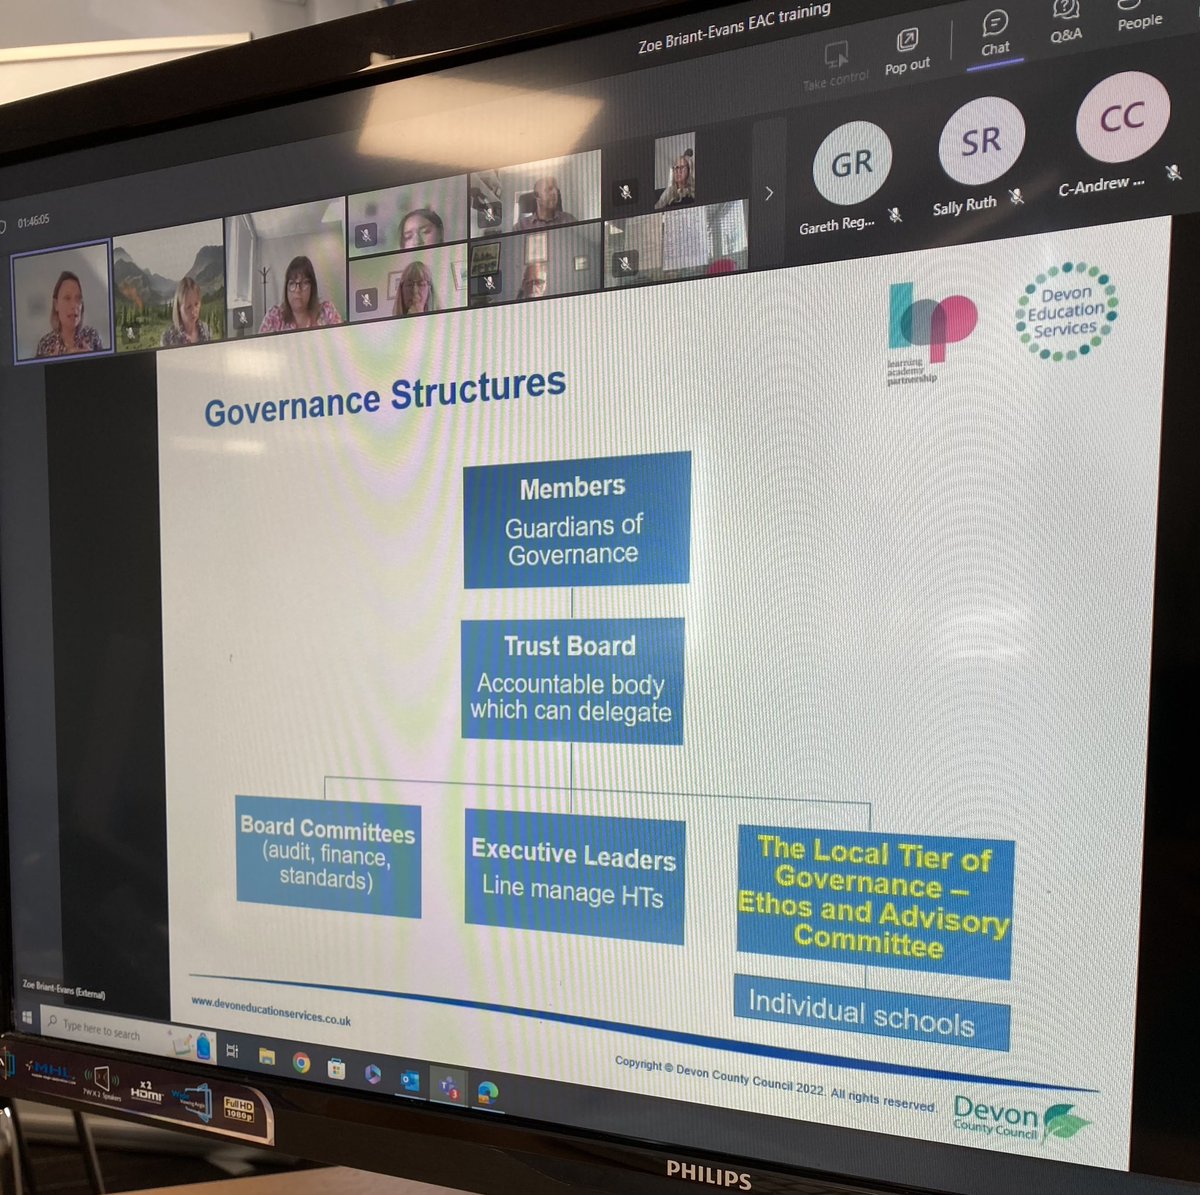 Great to have our local Ethos and Advisory Committee training with the brilliant Zoe Bryant-Evans. Kicking off our new approach to our local governance. @devonedservices @LAPacademies